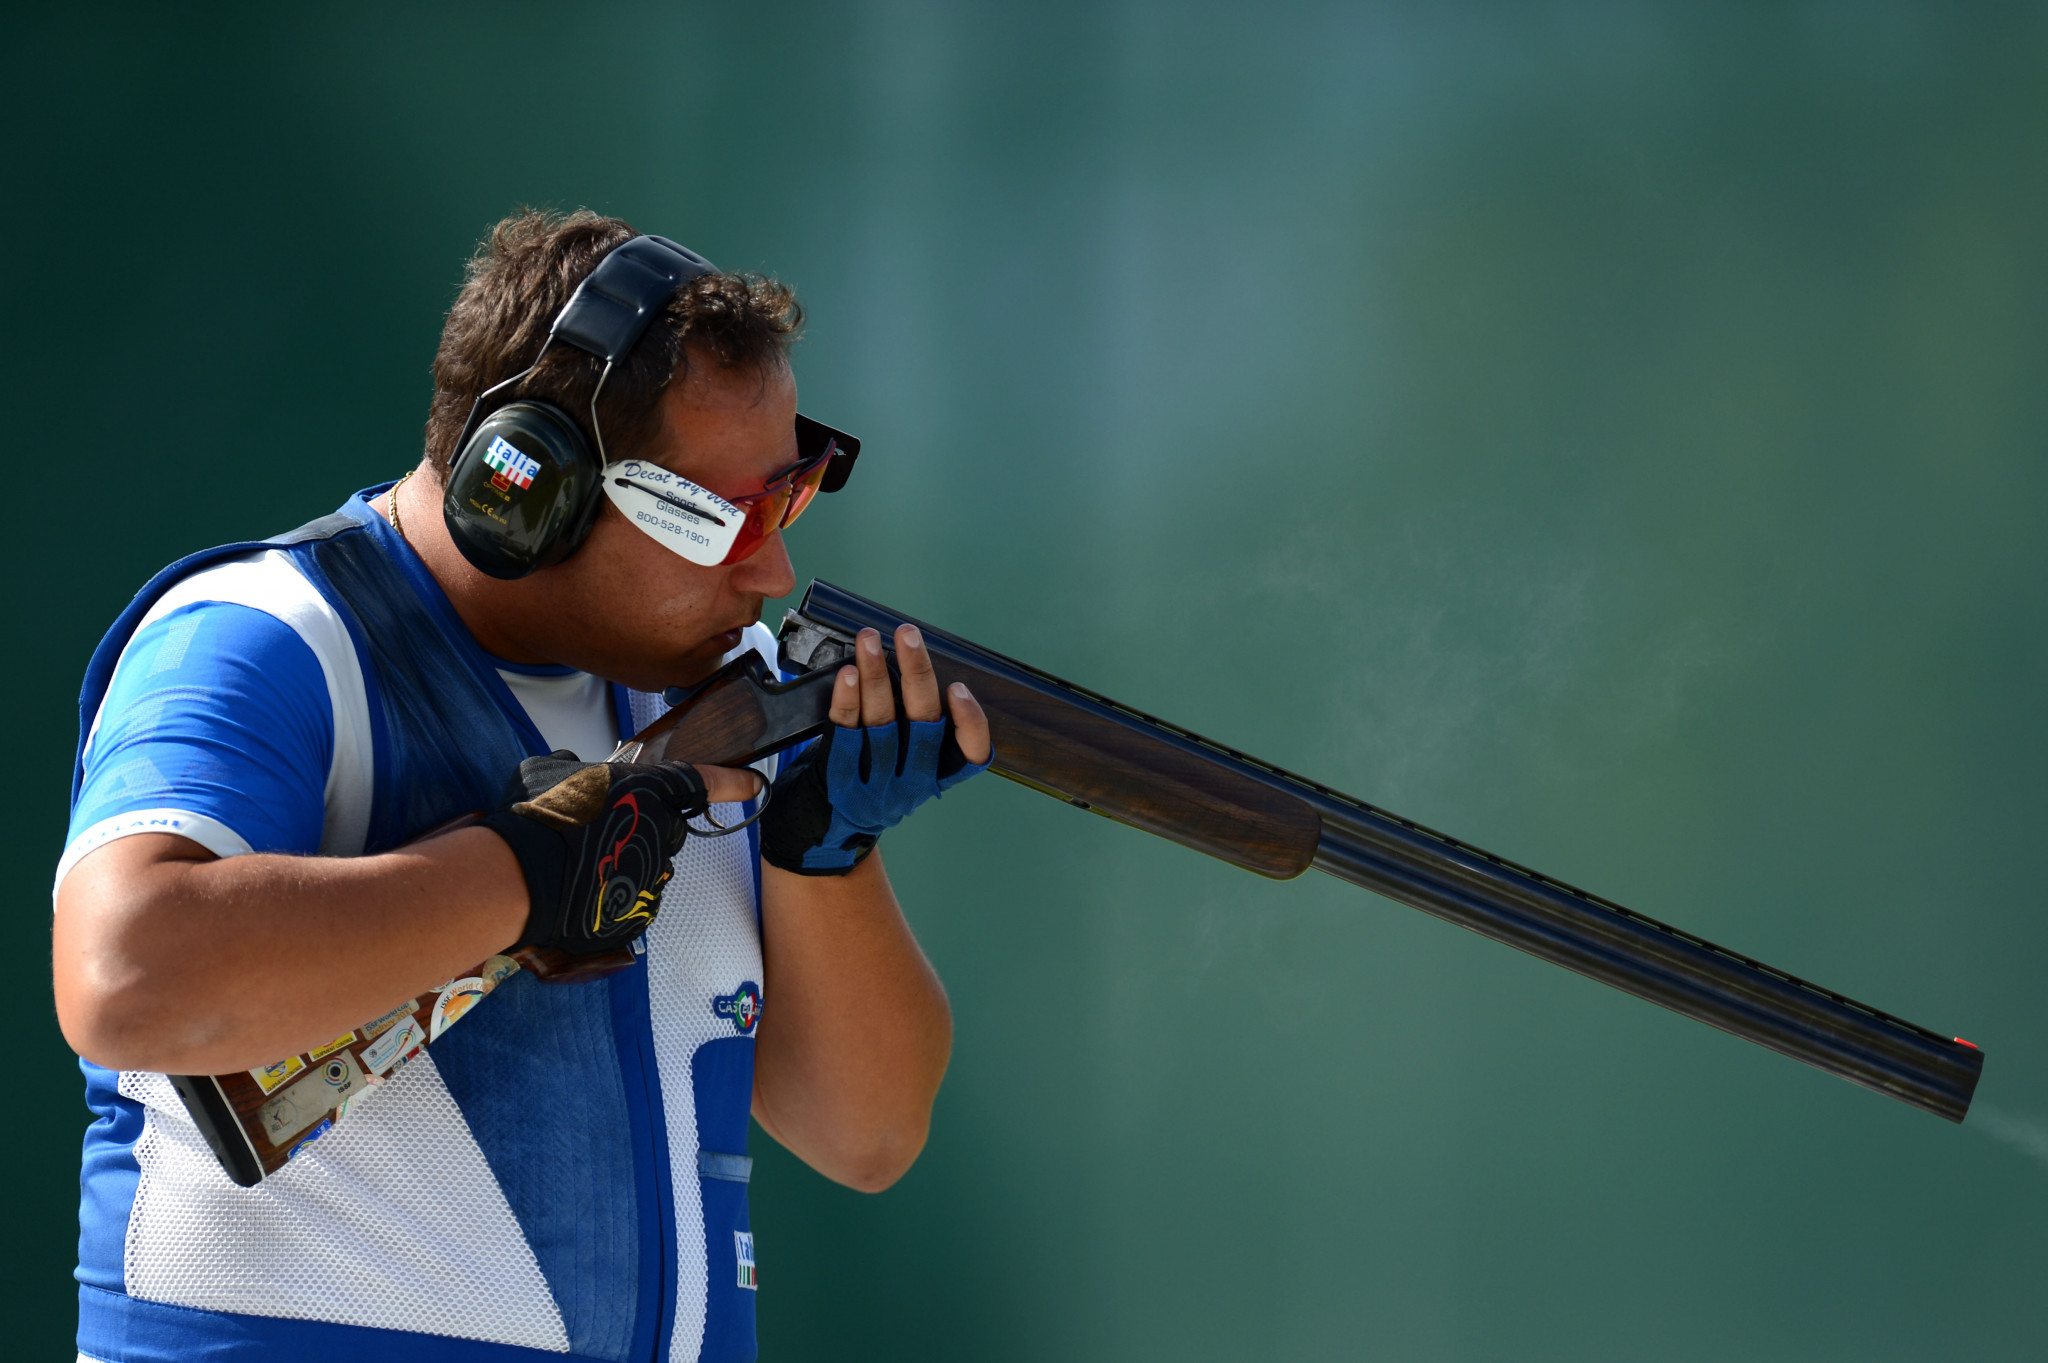 Olympic silver medallist Massimo Fabbrizi of Italy also scored 75 points on the first day of men's trap qualifying at the ISSF Grand Prix ©Getty Images